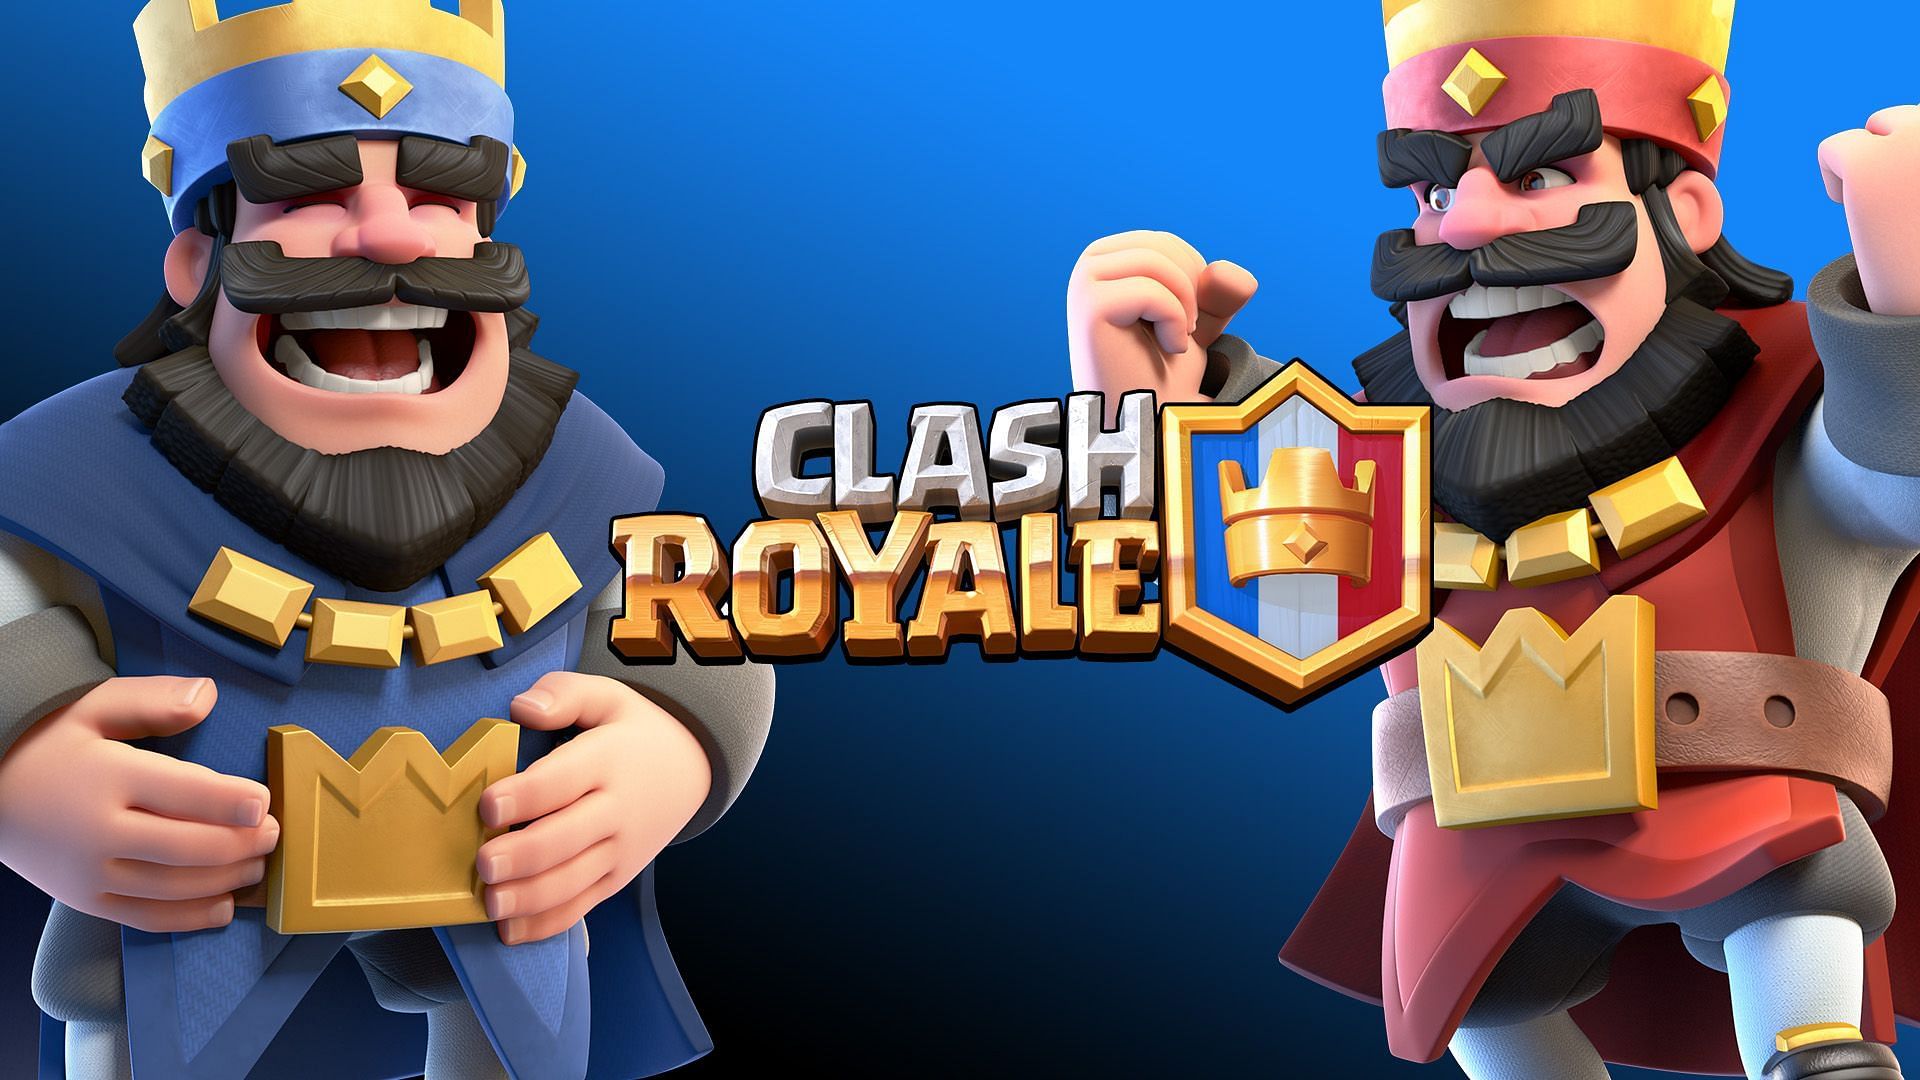 Clash Royale October 23 update